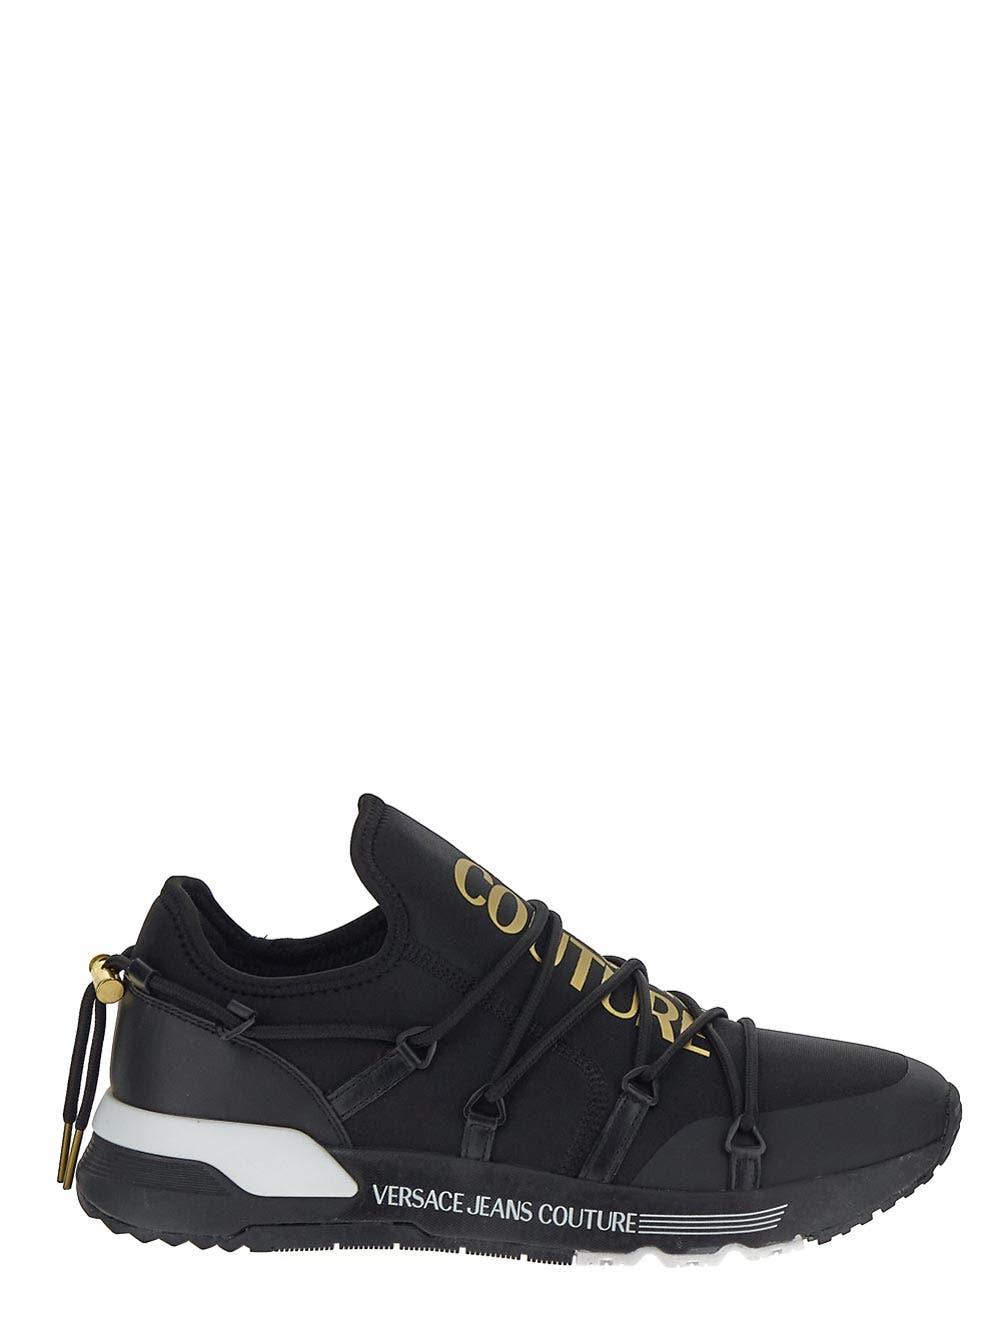 Versace Jeans Couture Logo Printed Sneakers